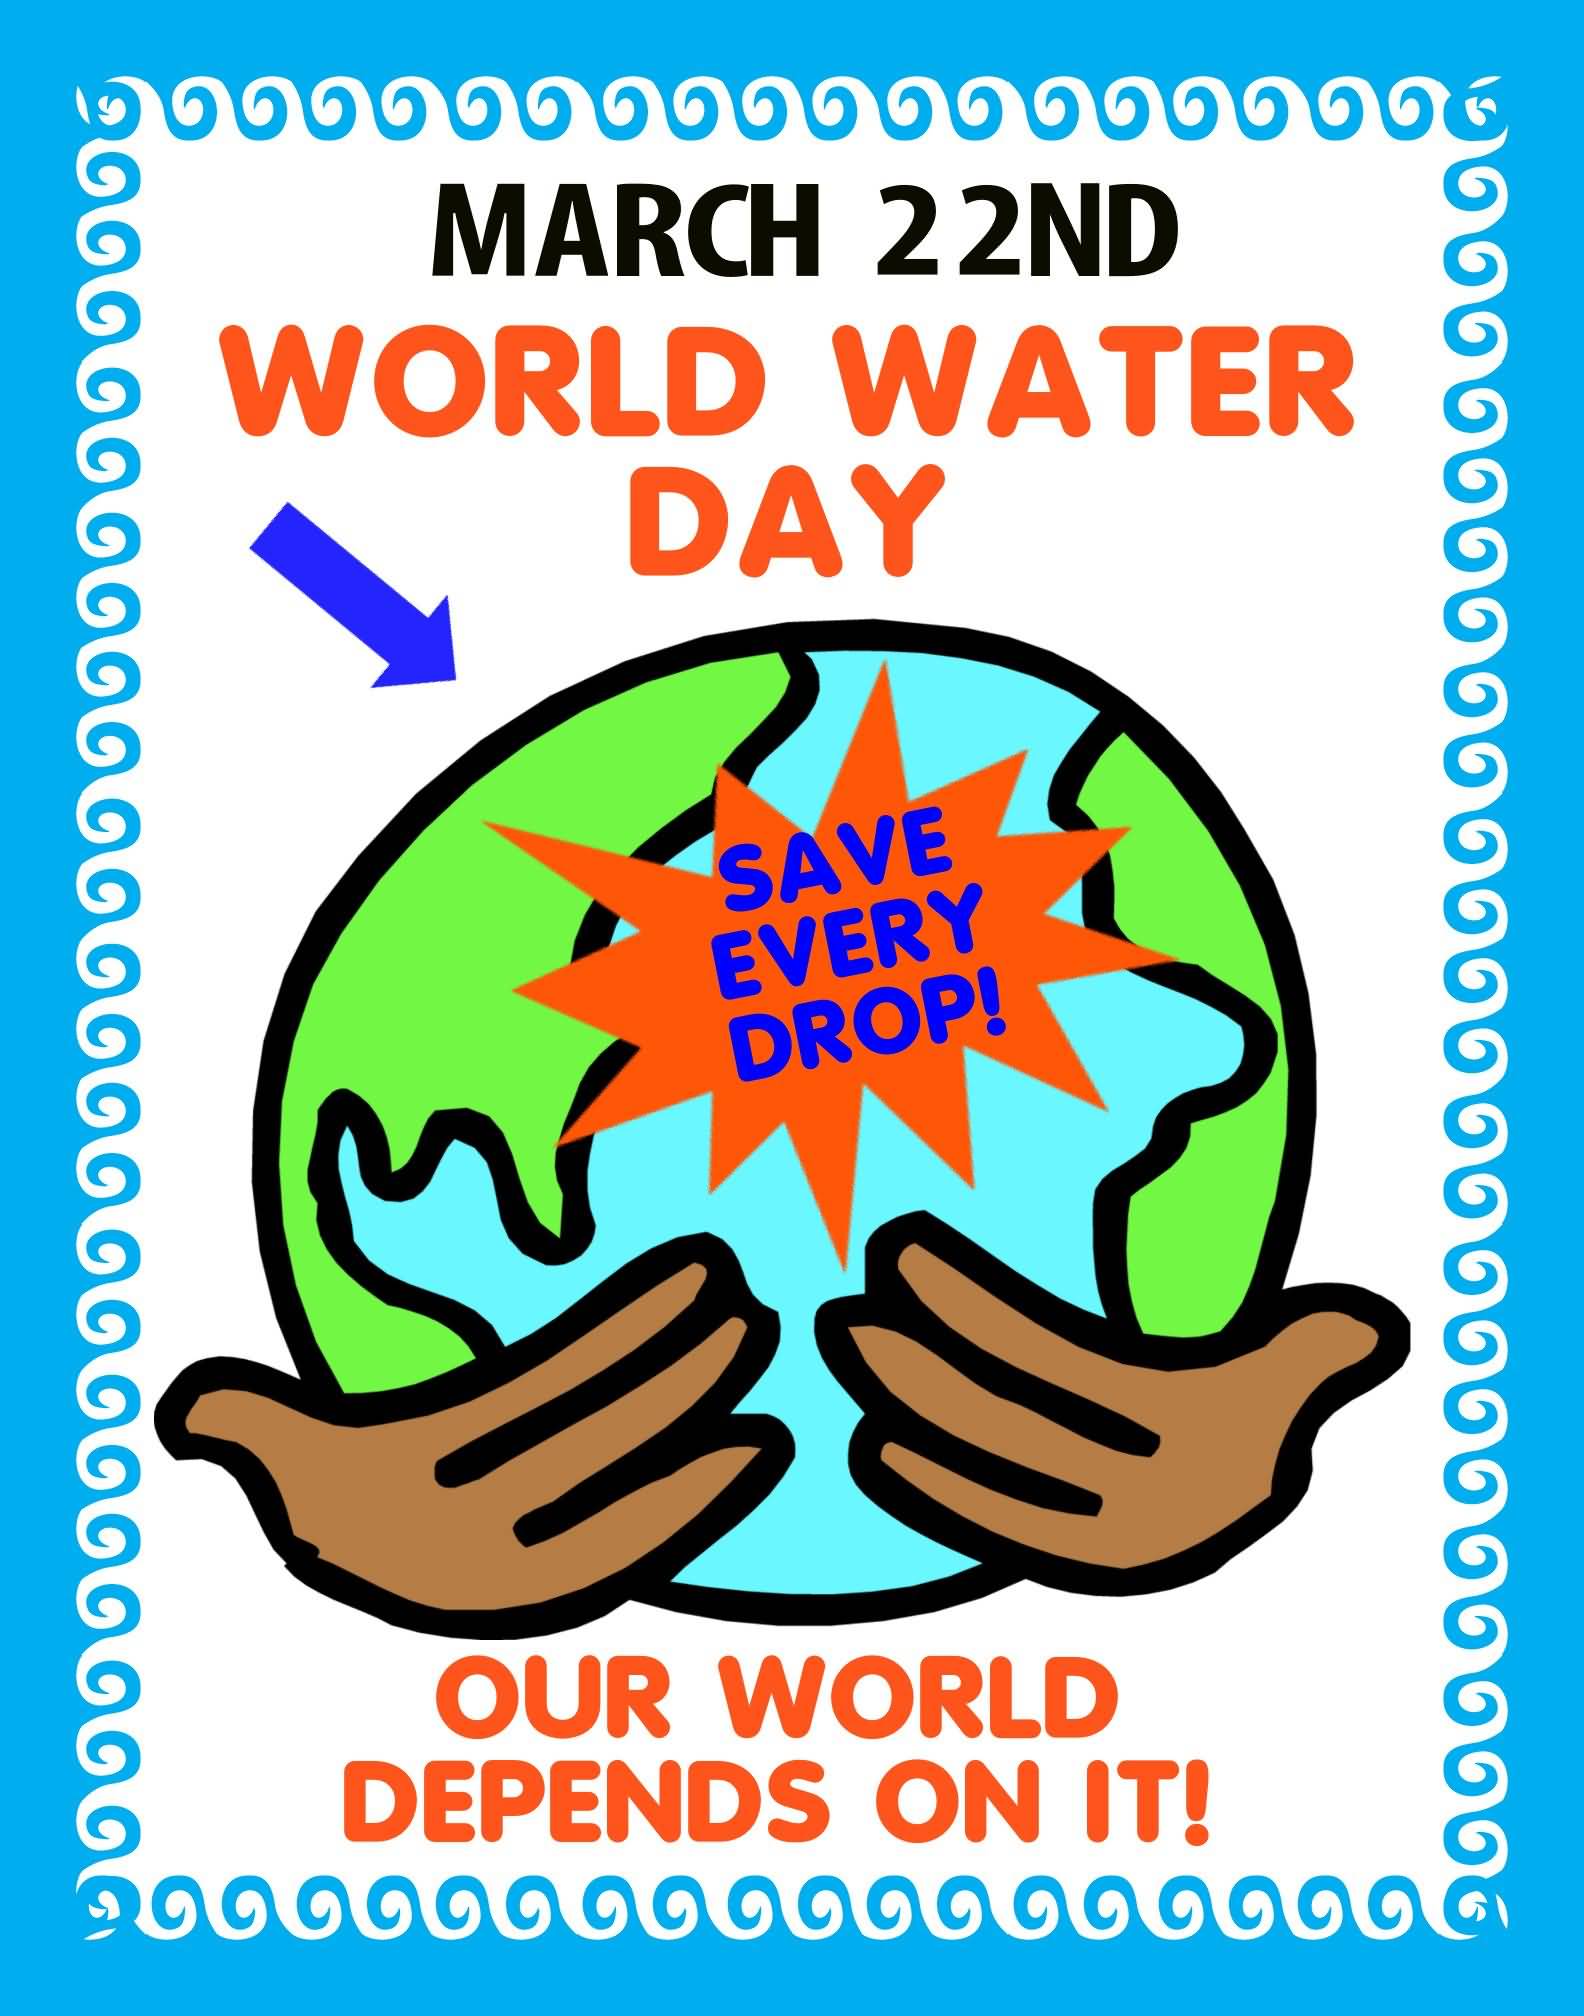 World water day poster images